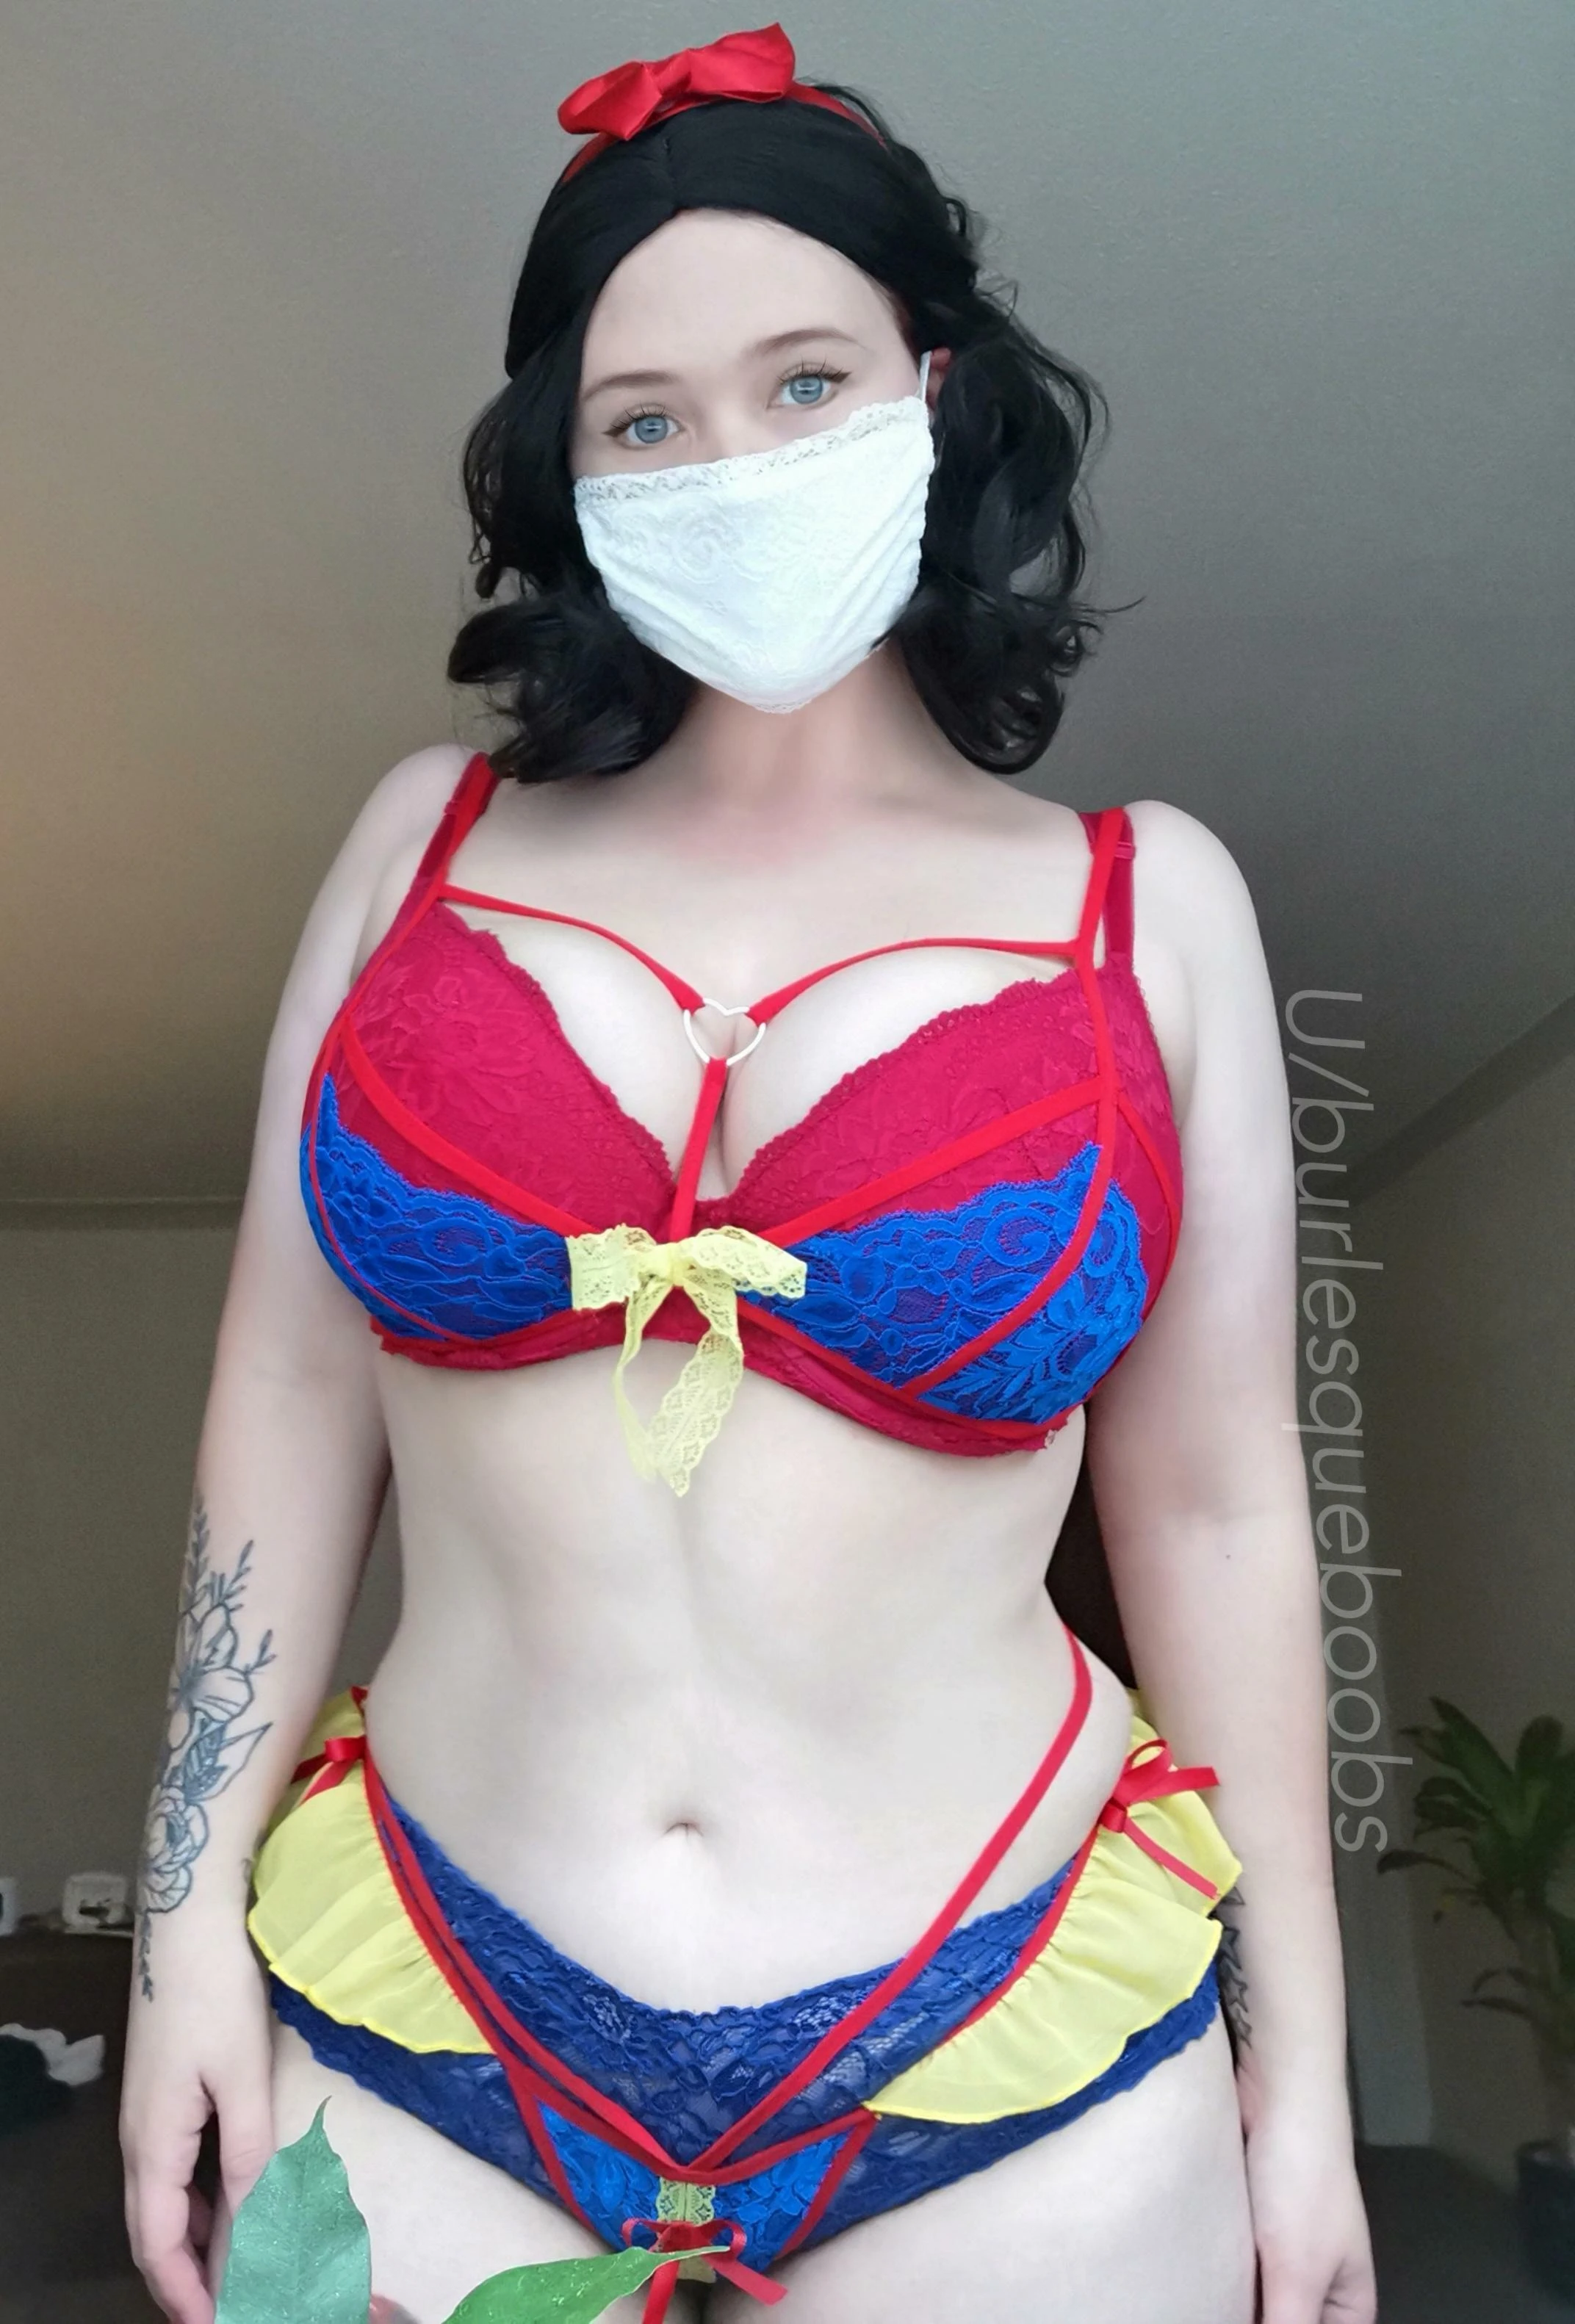 Want to make some babies with Snow white? ?